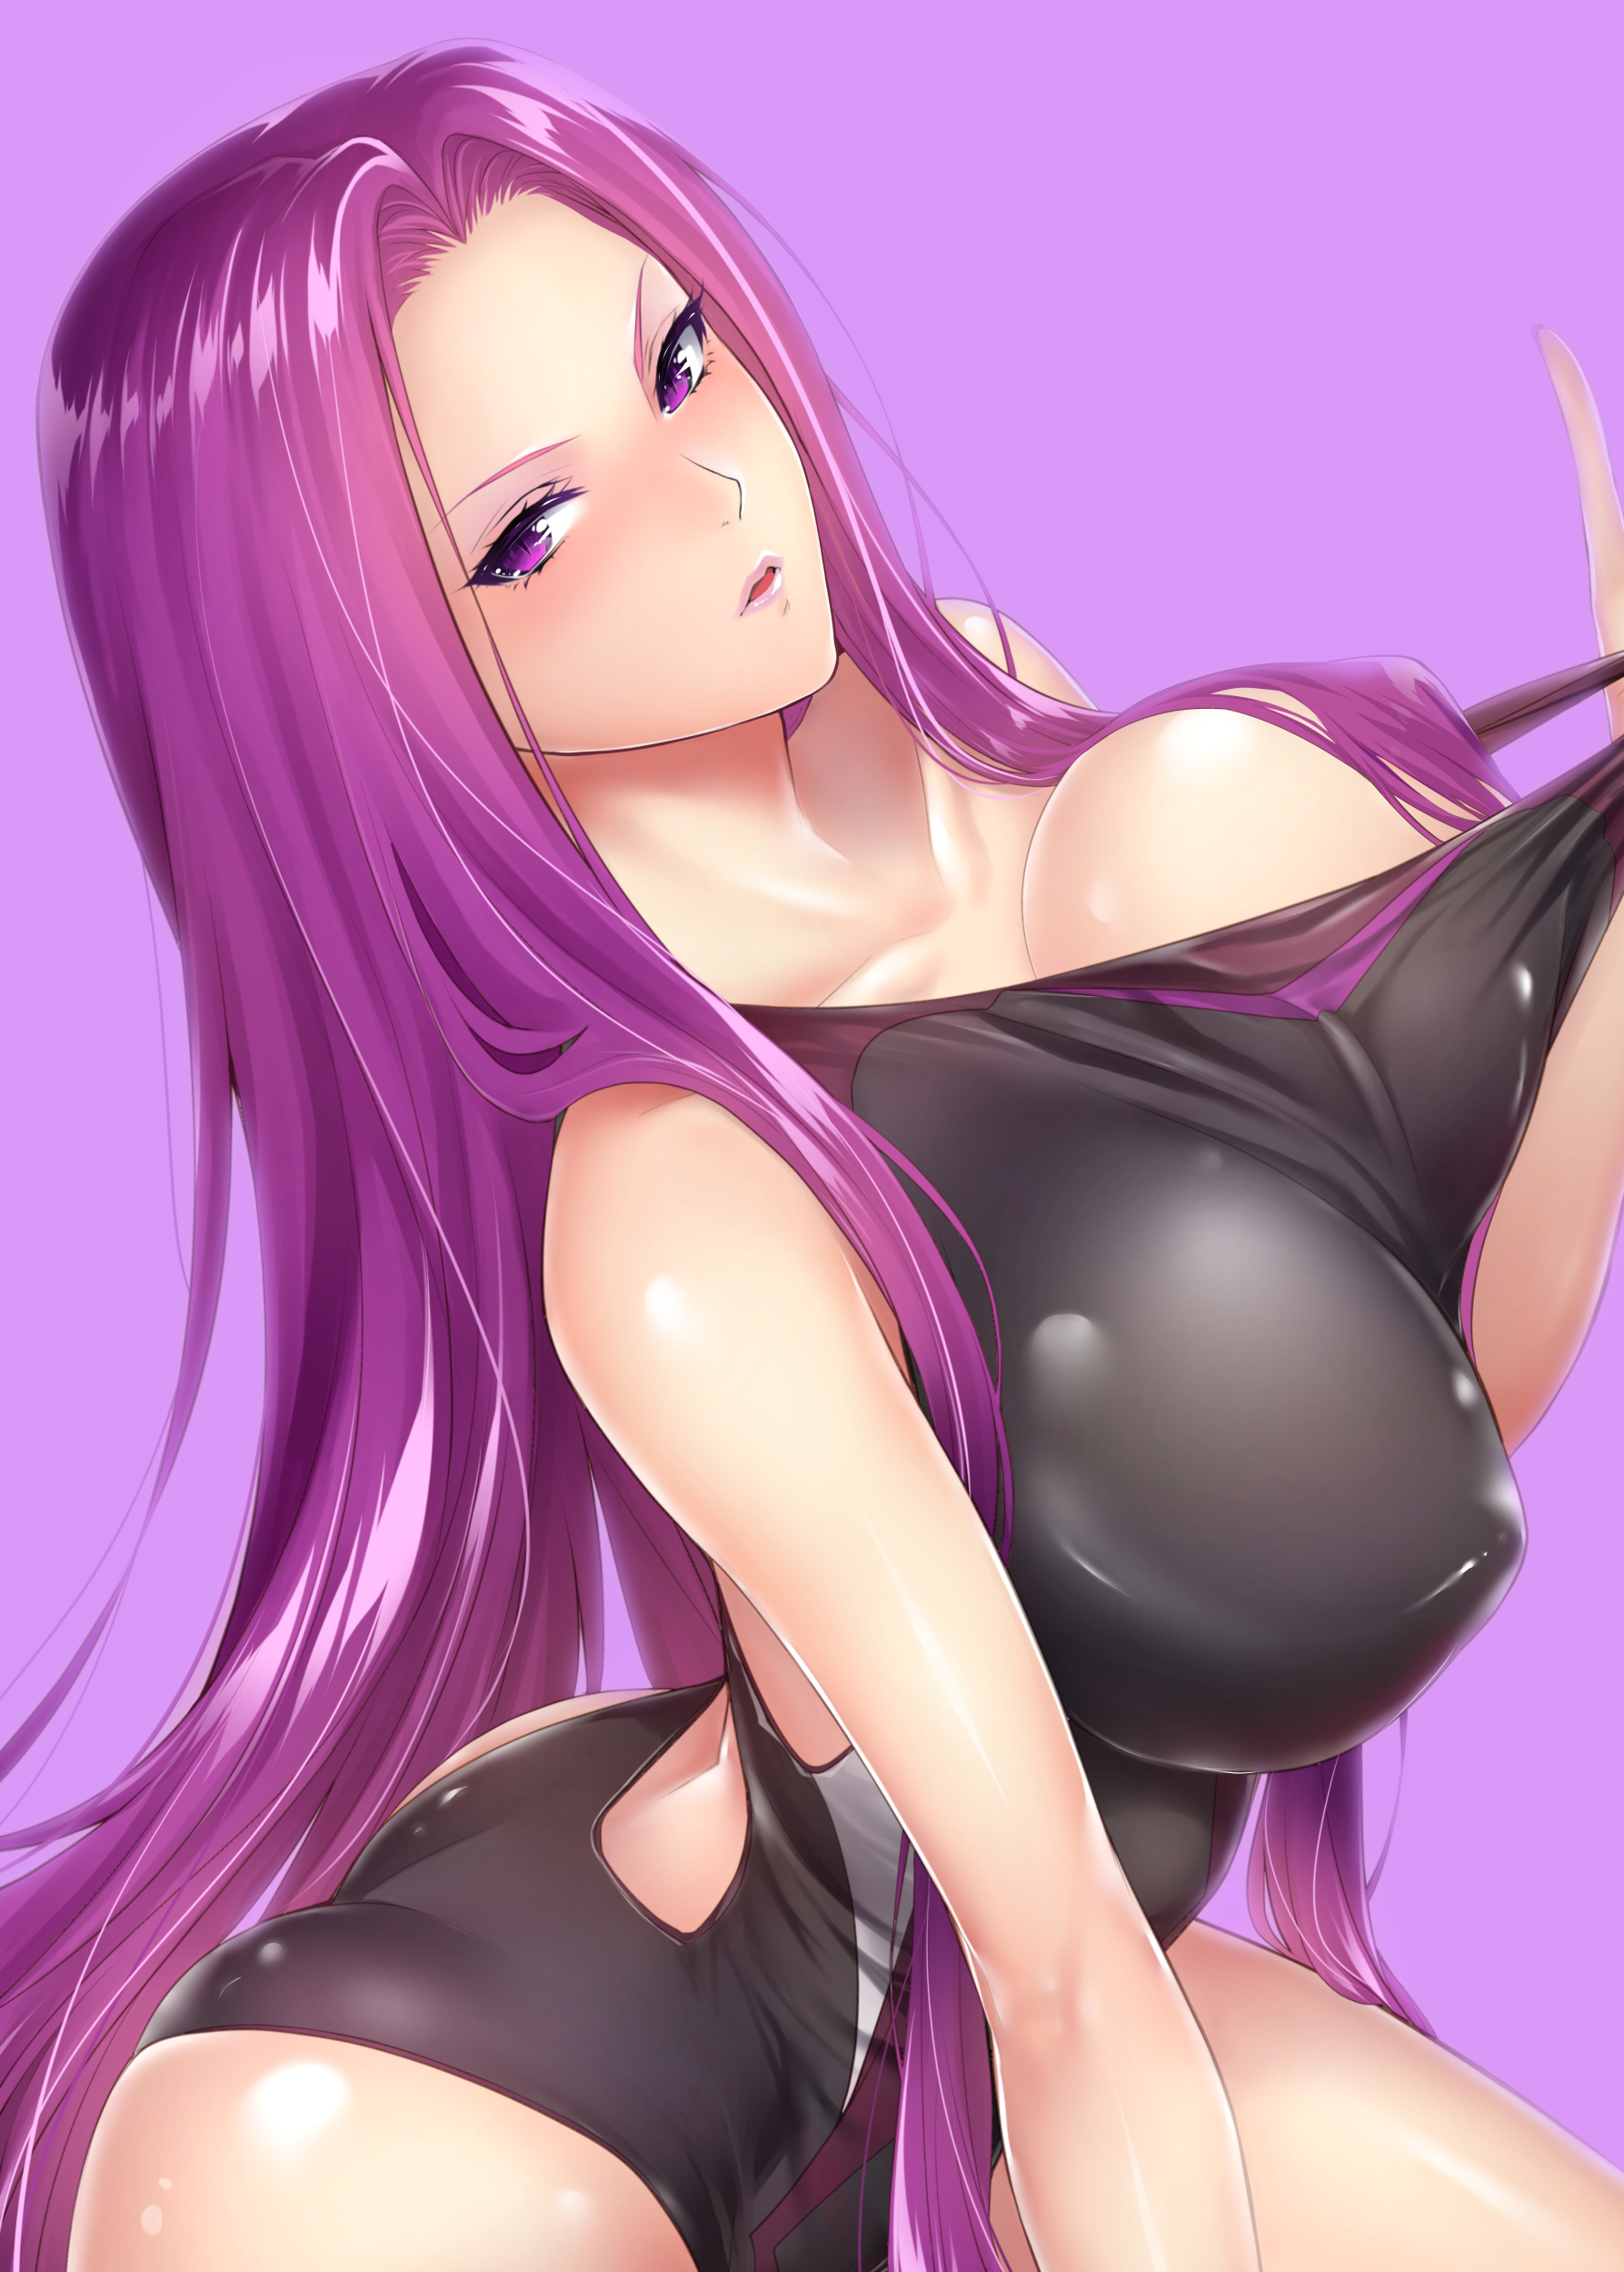 Anime 1787x2500 Fate series Fate/Stay Night fate/stay night: heaven's feel open mouth black swimsuit big boobs long hair anime girls purple hair competition swimsuit cleavage pulling clothing portrait display erotic art  thighs curvy anime Rider (Fate/Stay Night) simple background zucchini one-piece swimsuit purple eyes 2D fan art ecchi